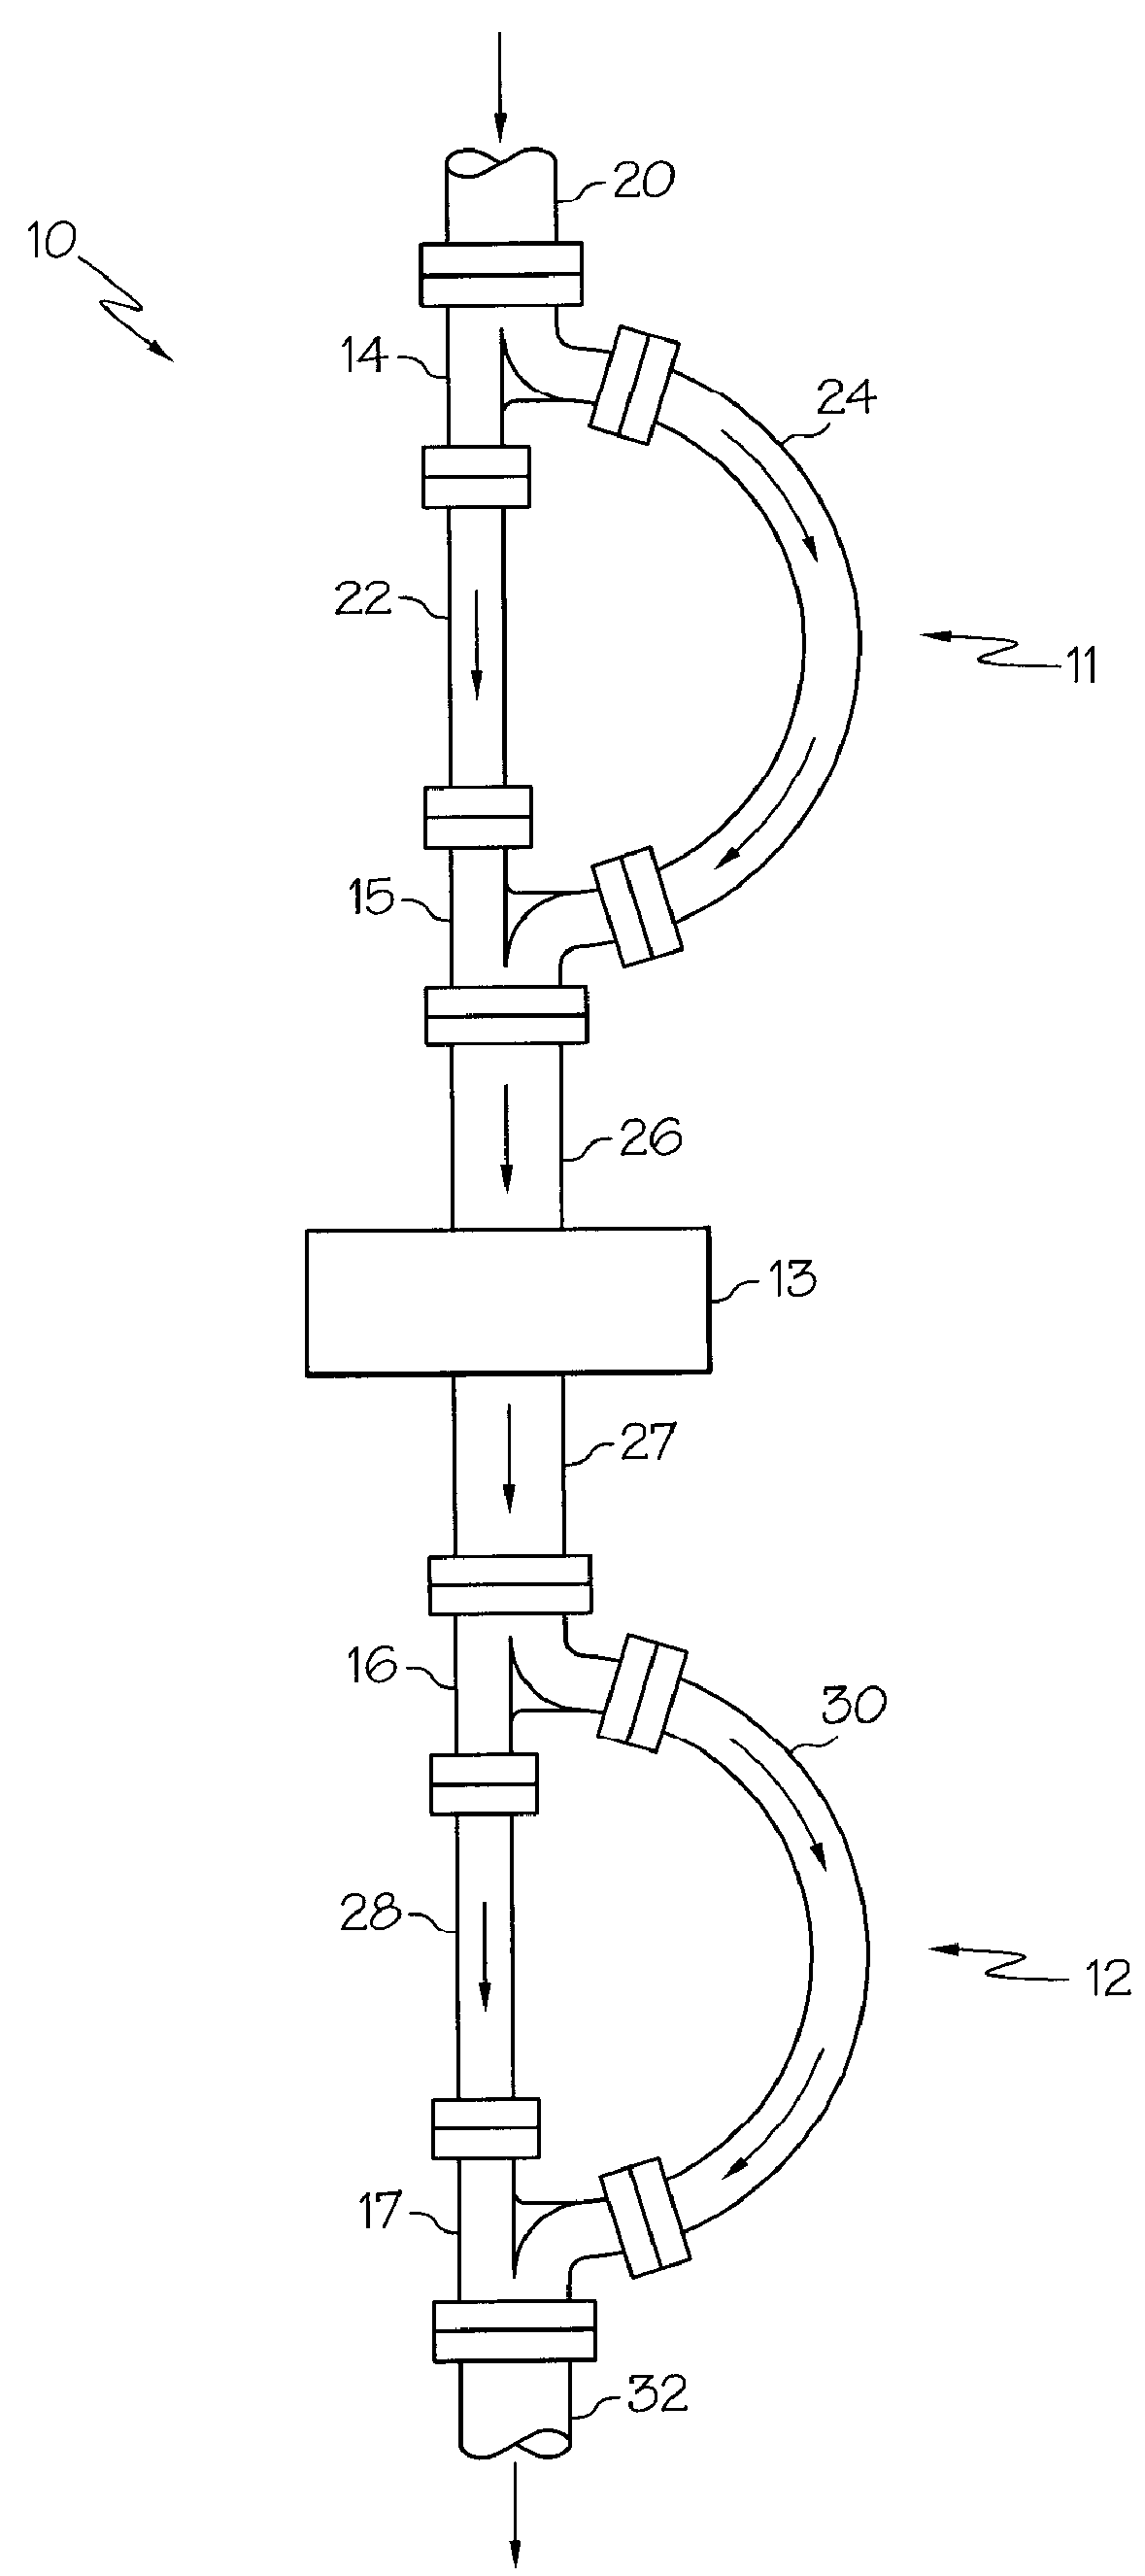 Branching Device for a Pulsation Attenuation Network